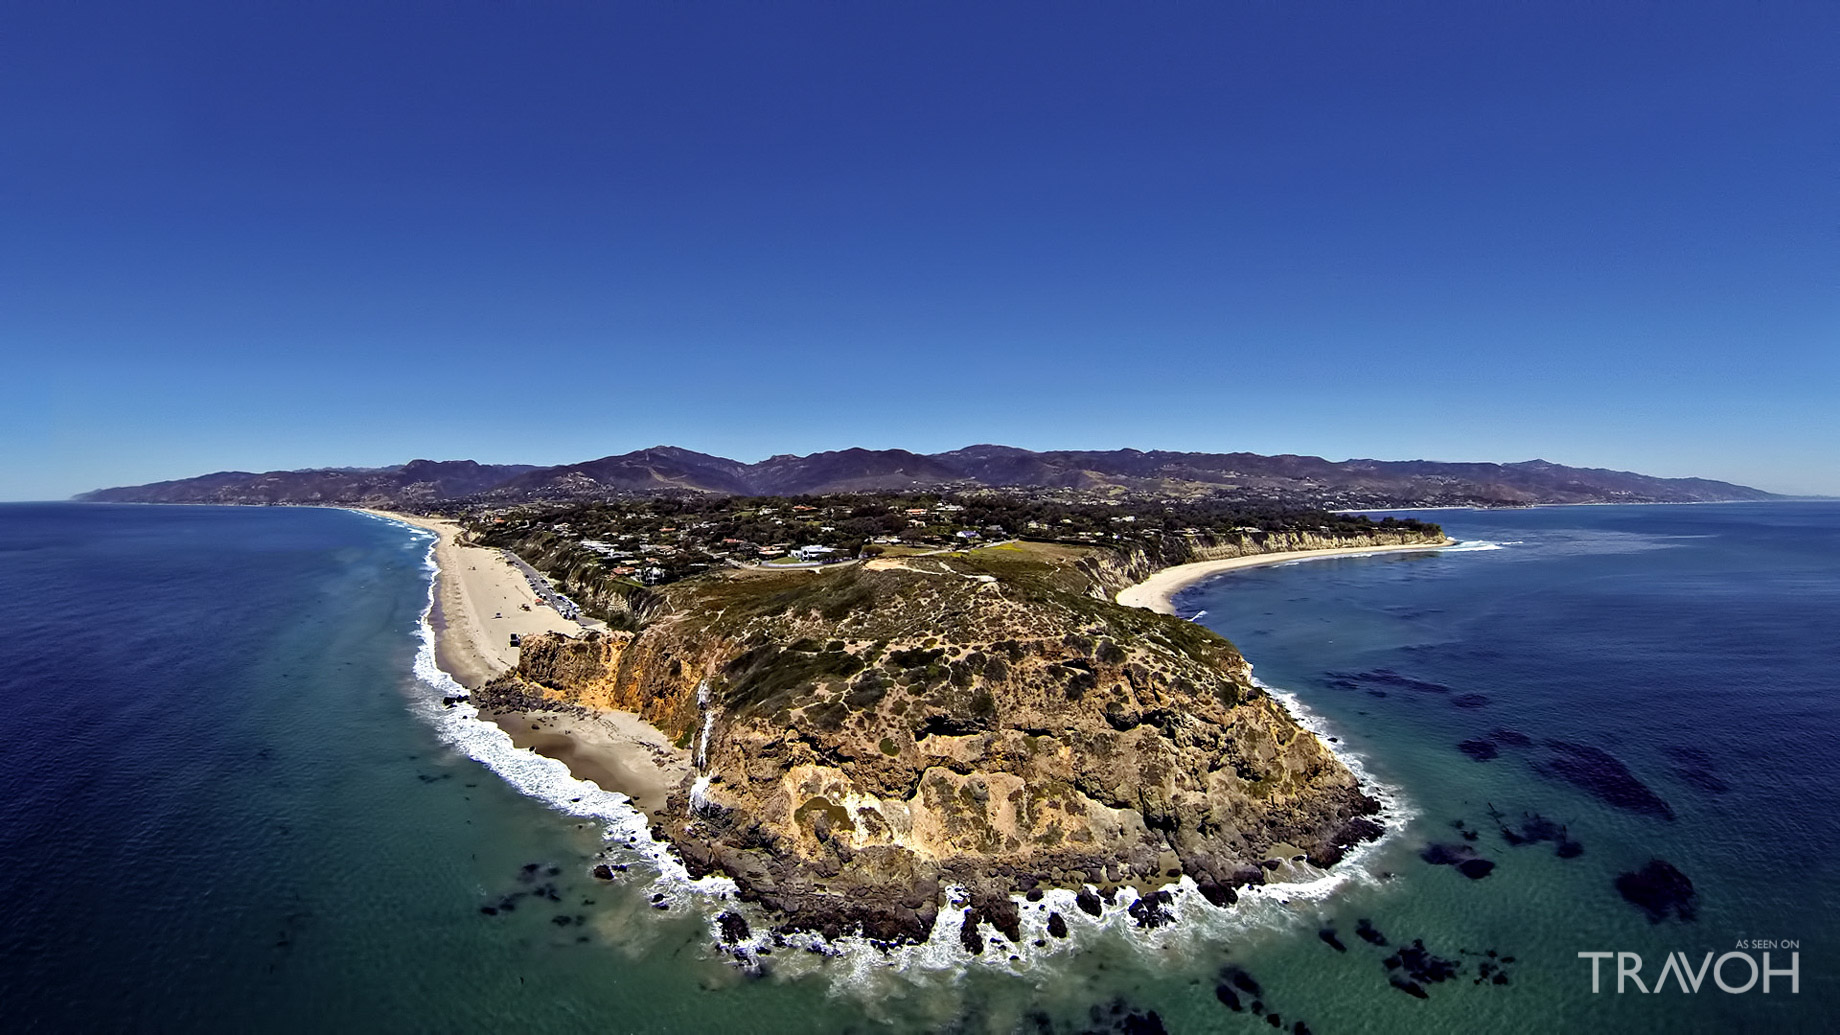 Point Dume Beach - Exploring 10 of the Top Beaches in Los Angeles, California